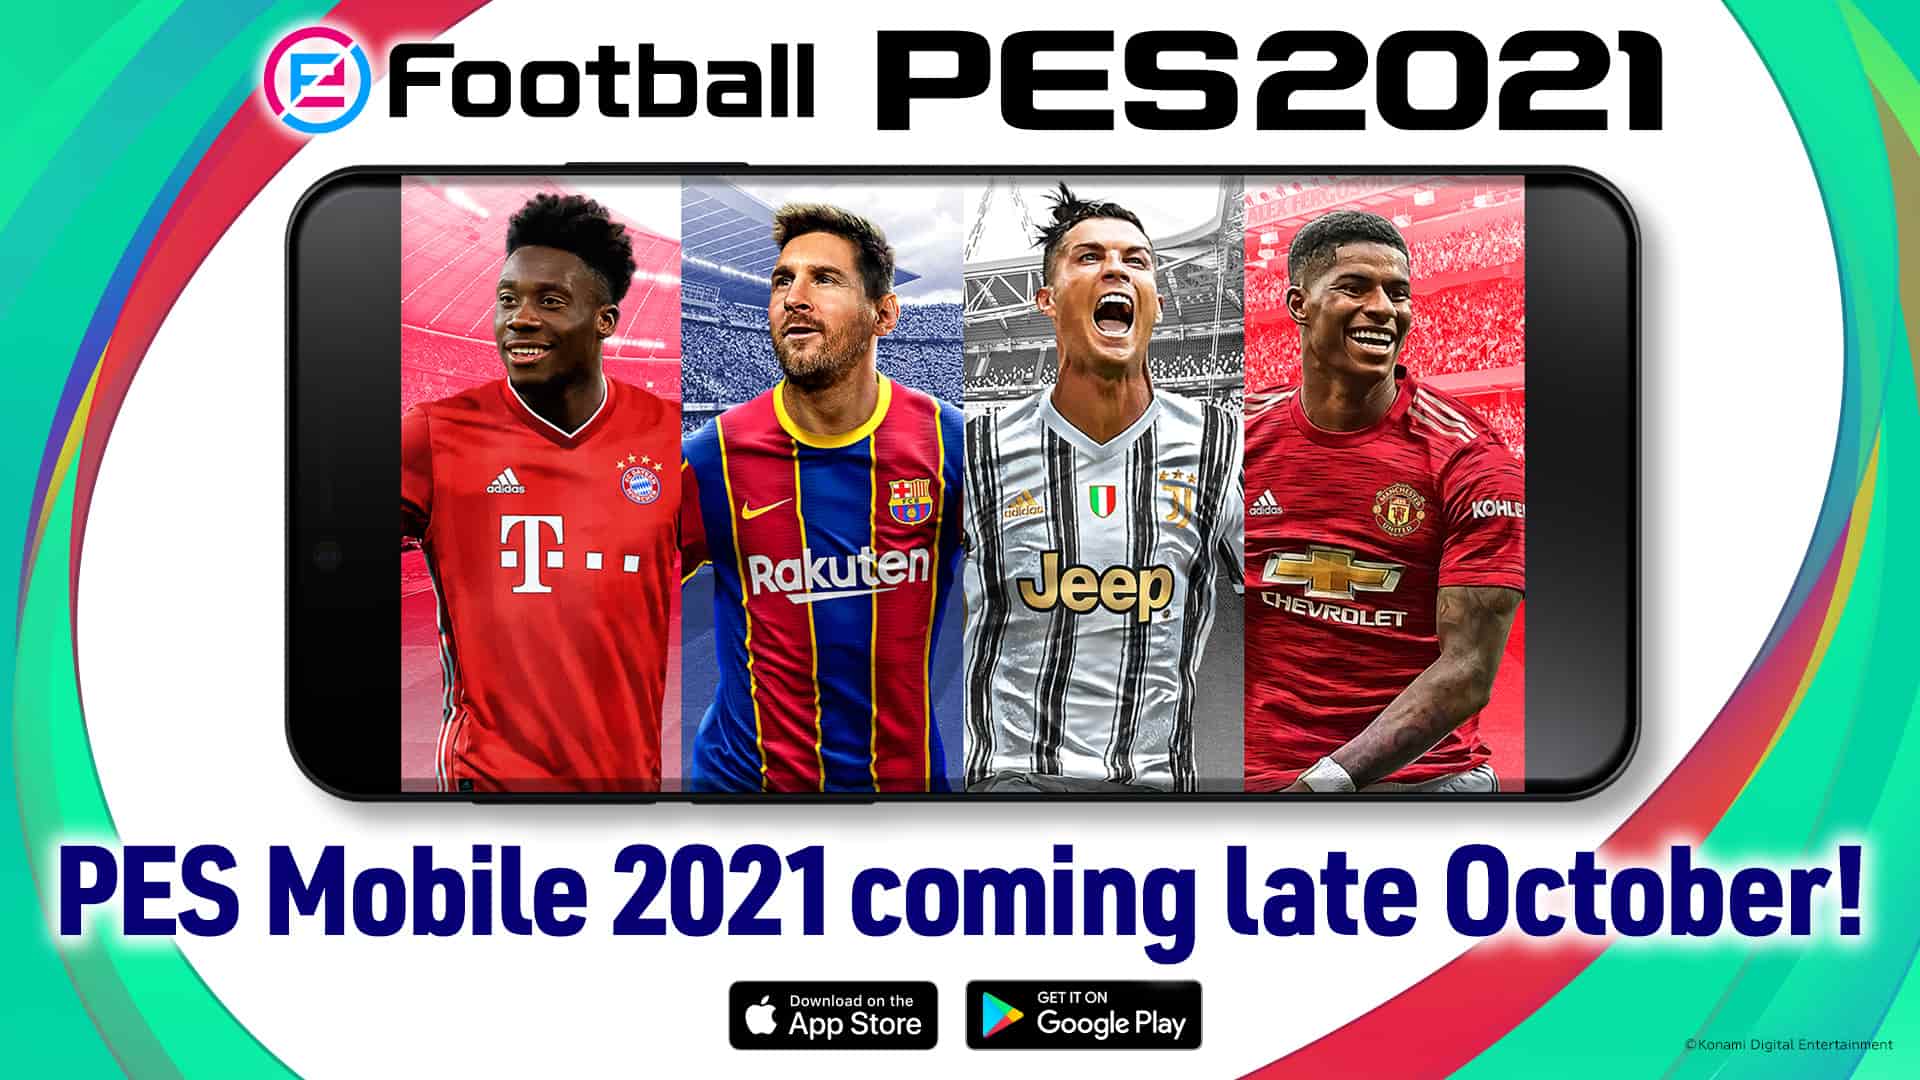 Learn How to Get Free Coins on PES Mobile 2021